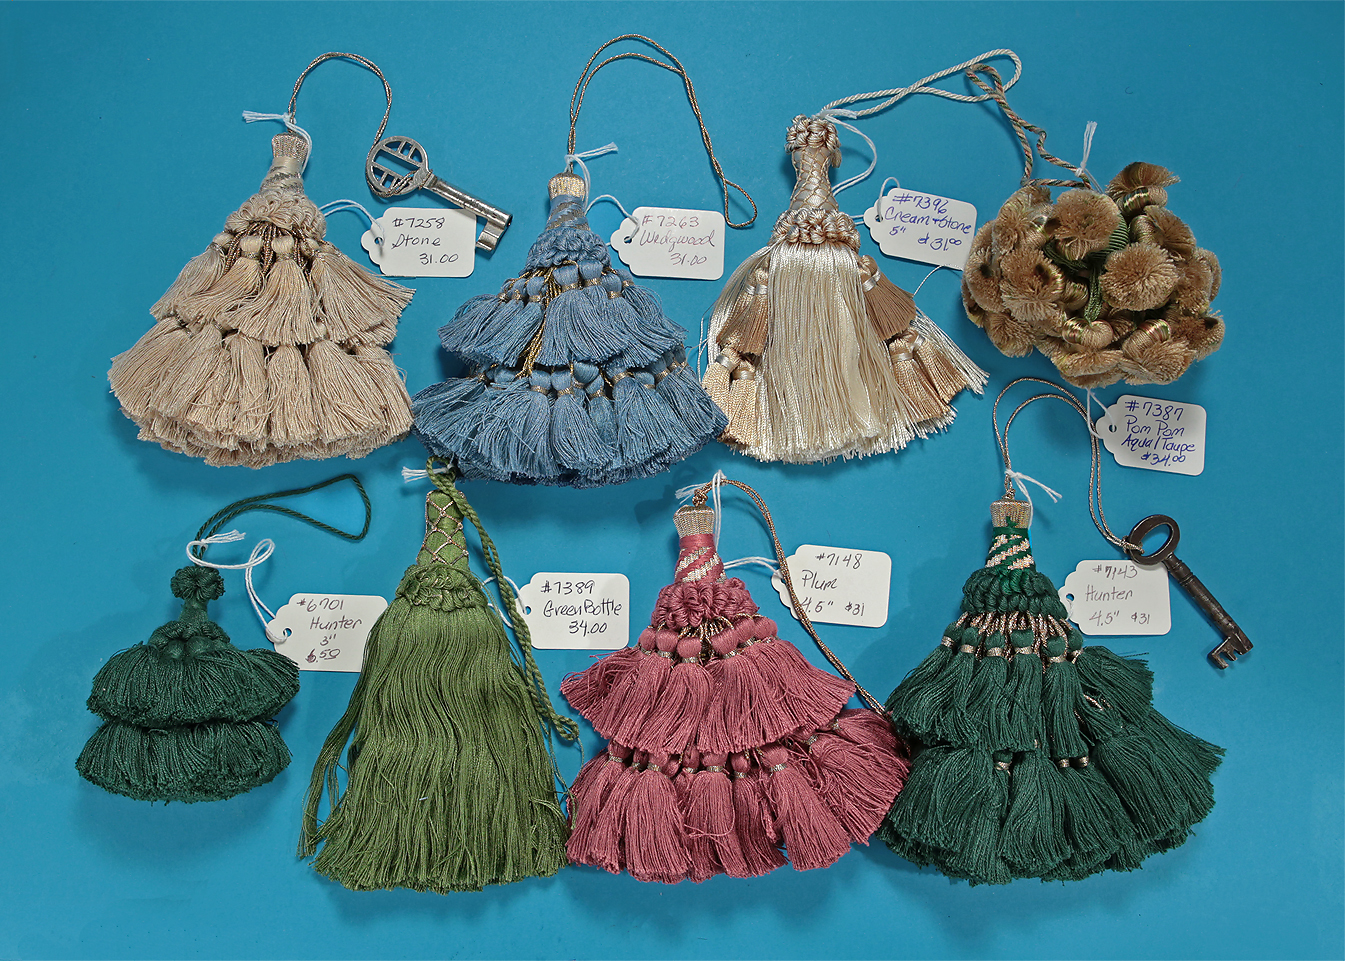 Imported Tassels, M. Ford Creech Antiques